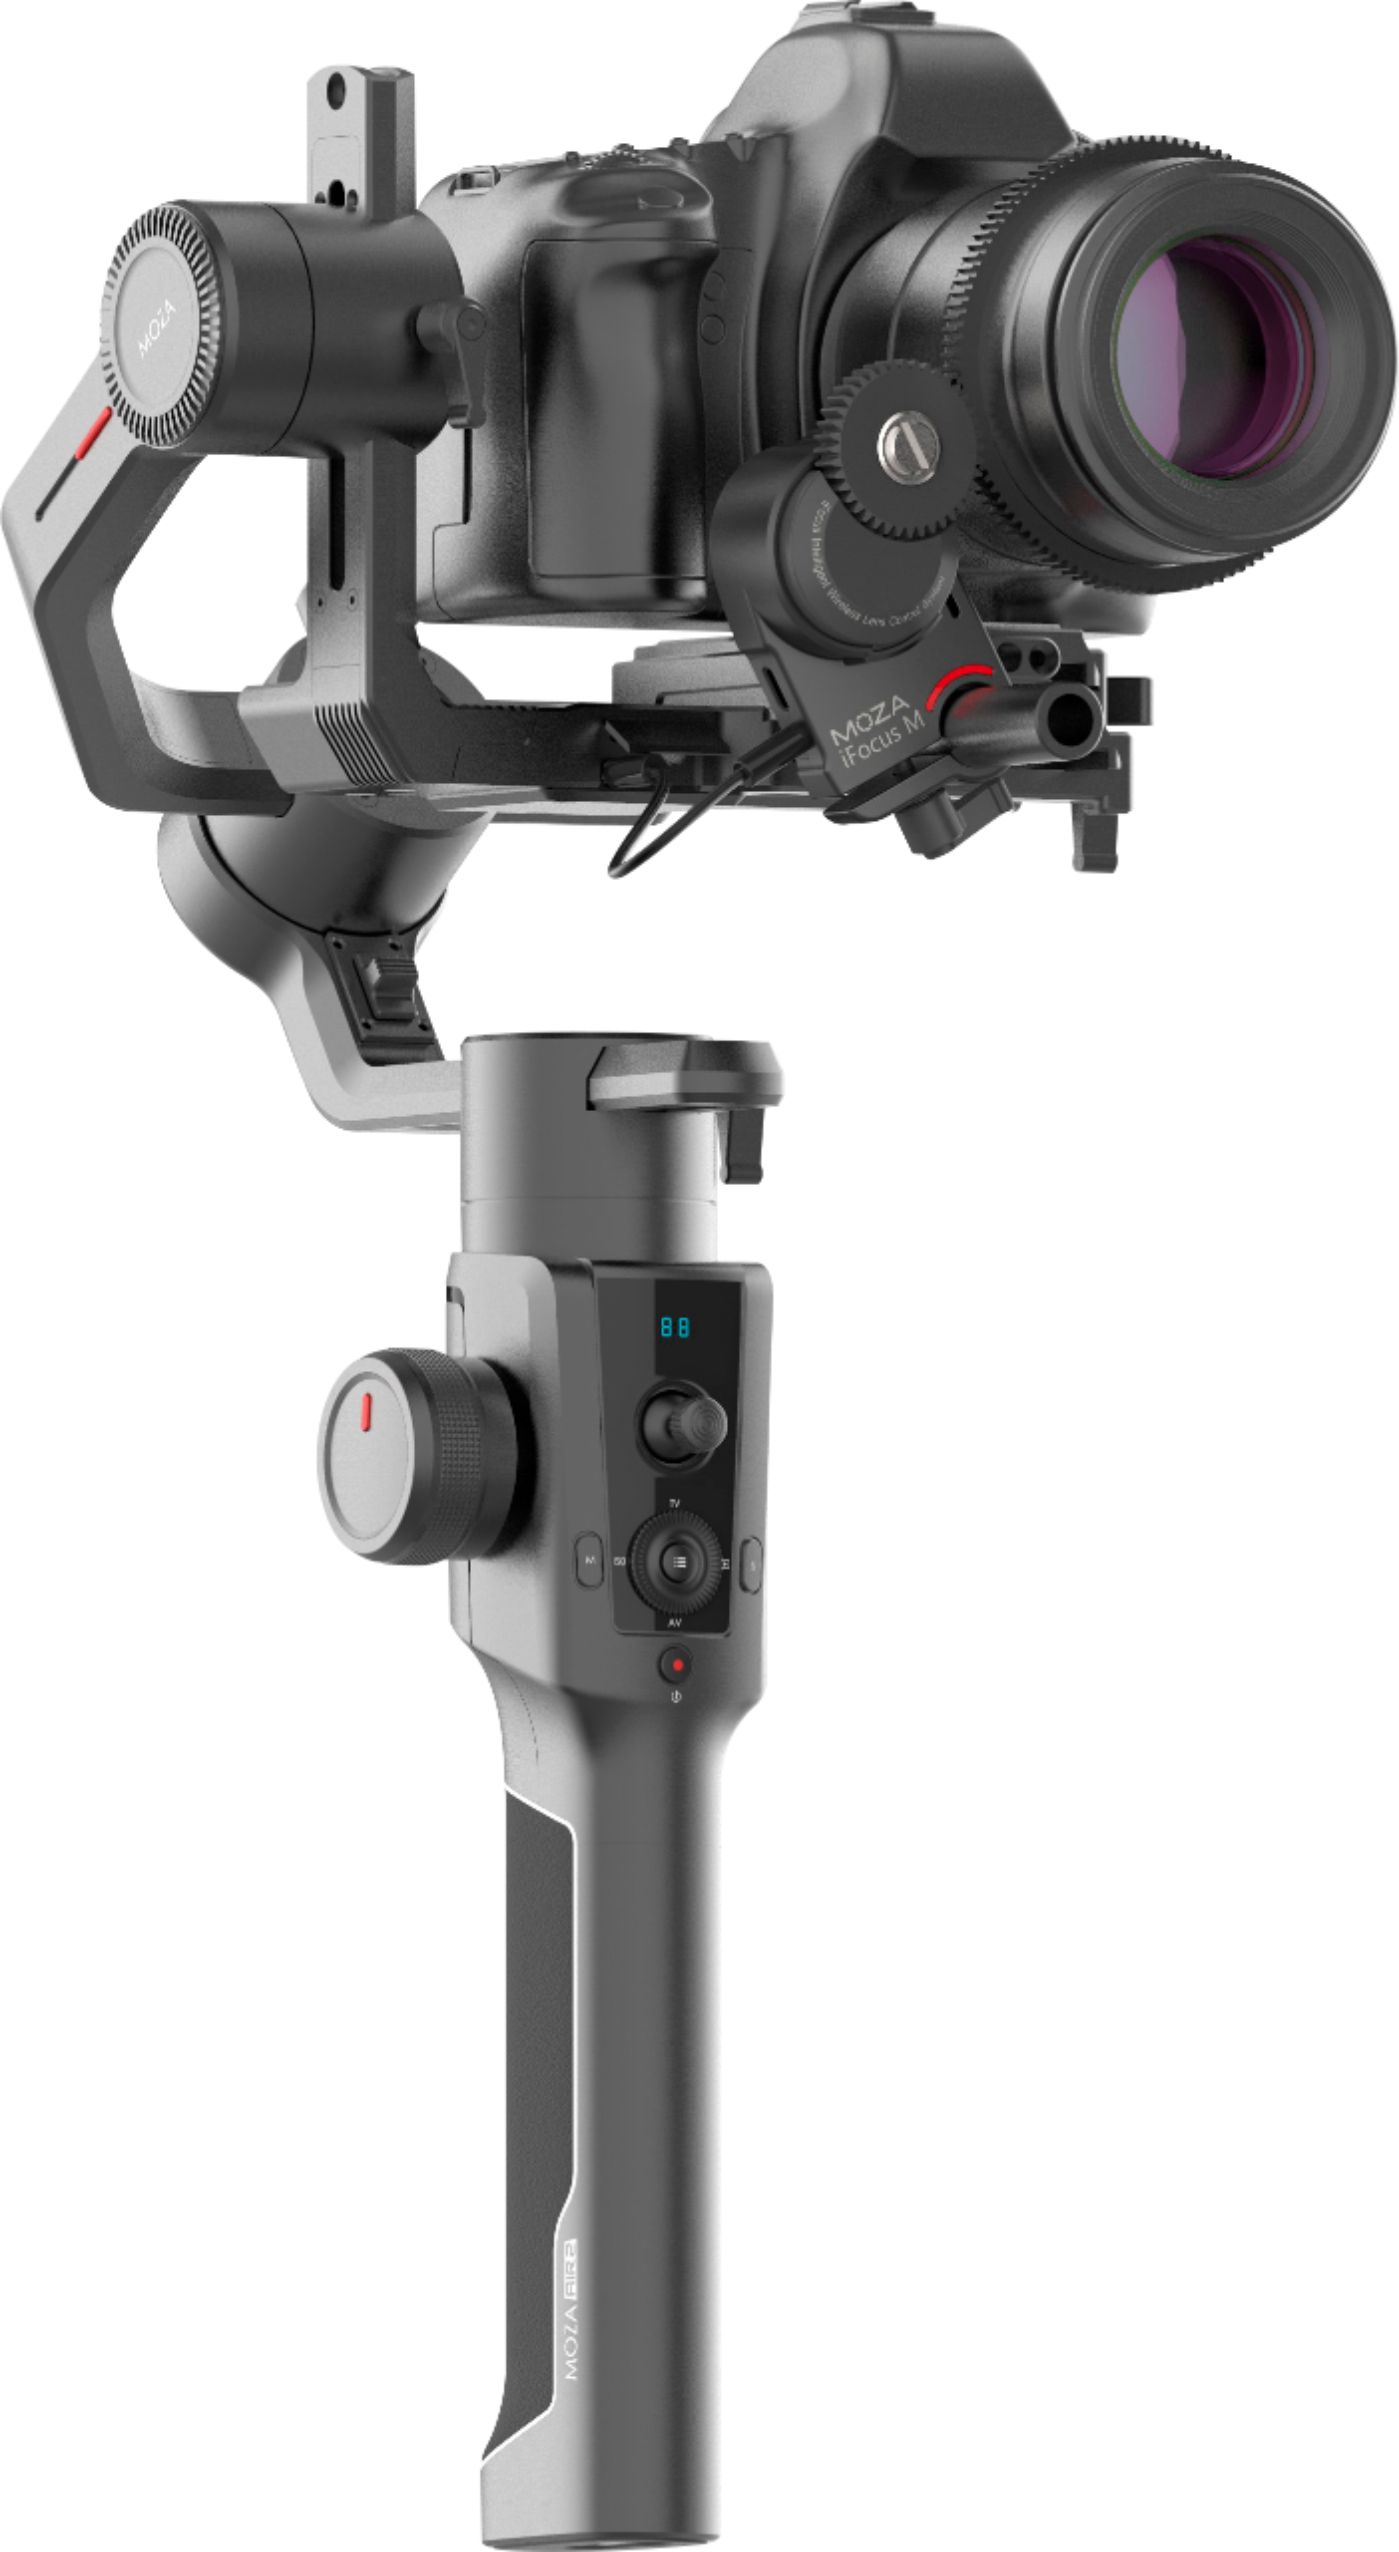 Angle View: DJI OM 5 Smartphone 3-Axis Gimbal Stabilizer